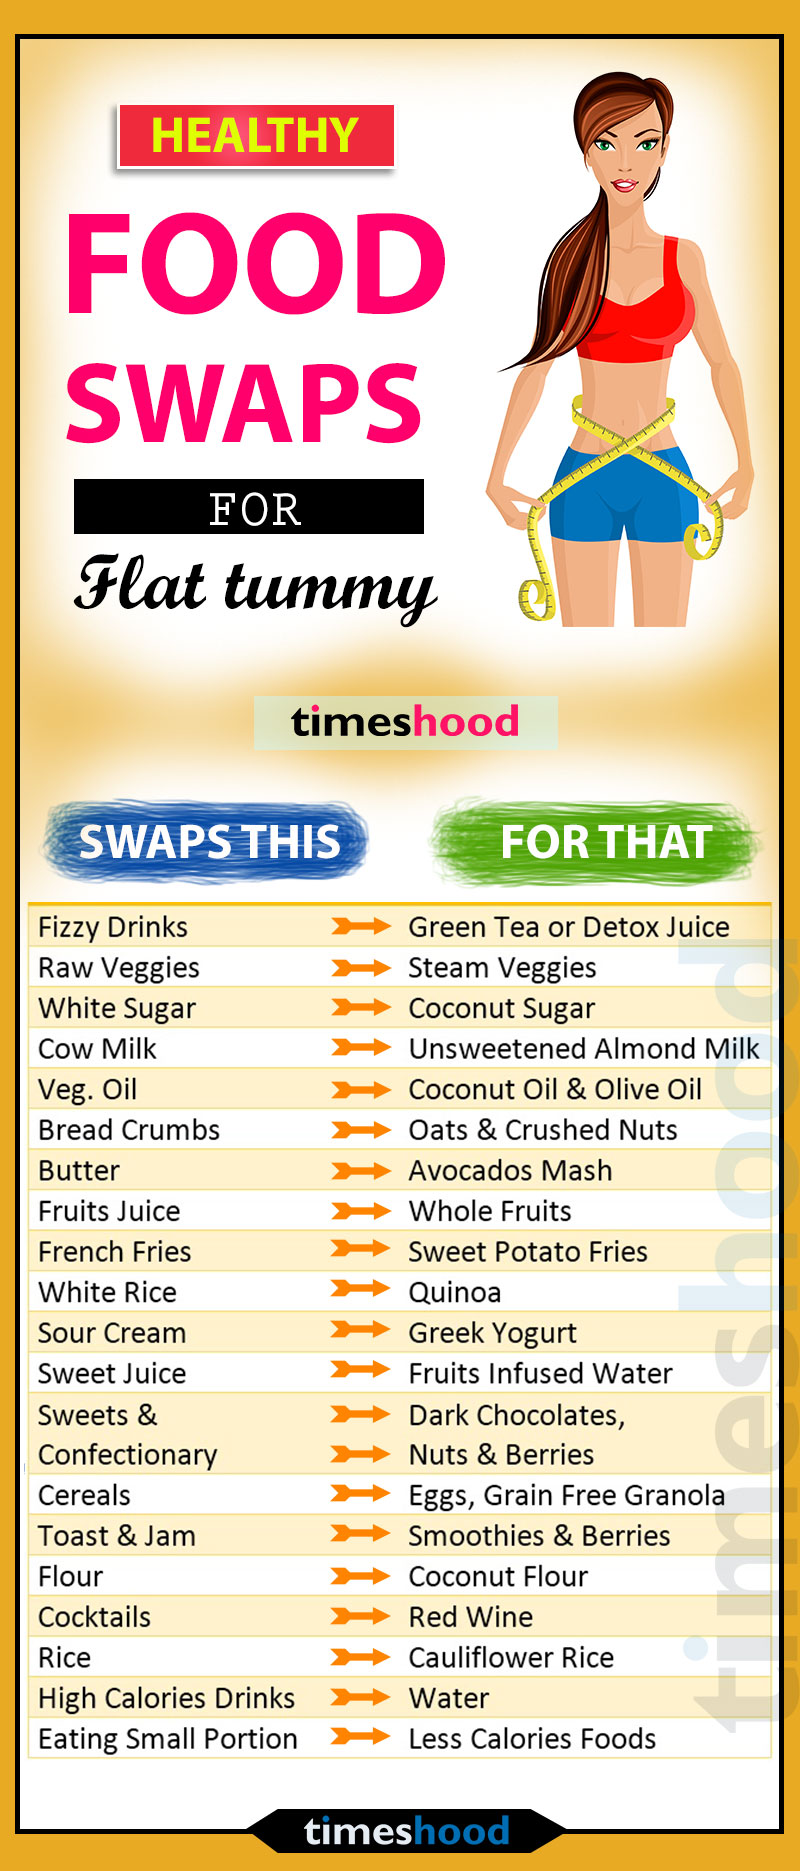 Try these healthy food swaps for flat belly. Get flat belly in 7 days with easy diet hacks. Best tips for flat tummy. Easy flat belly rules. Get rid of your belly fat with these simple and healthy flat tummy tips. Flat tummy rules. Flat stomach tips. From diet, exercise to lifestyle tips to get of stubborn belly fat. Weight loss tips. Reduce belly fat within a week. 